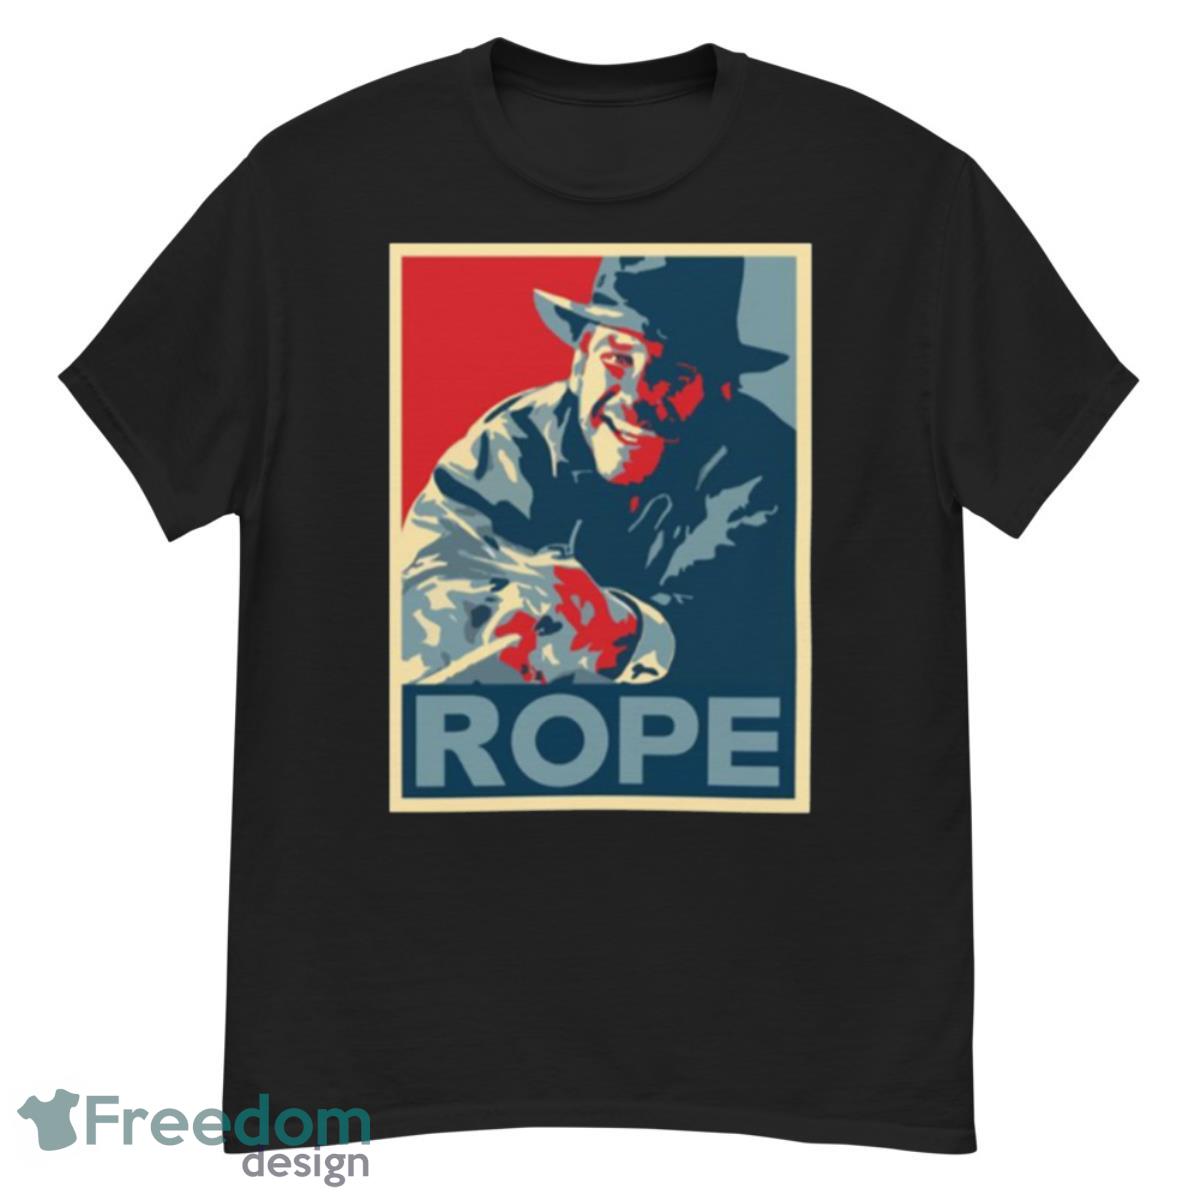 Rope Smiling Raiders Of The Lost Ark Graphic shirt - G500 Men’s Classic T-Shirt